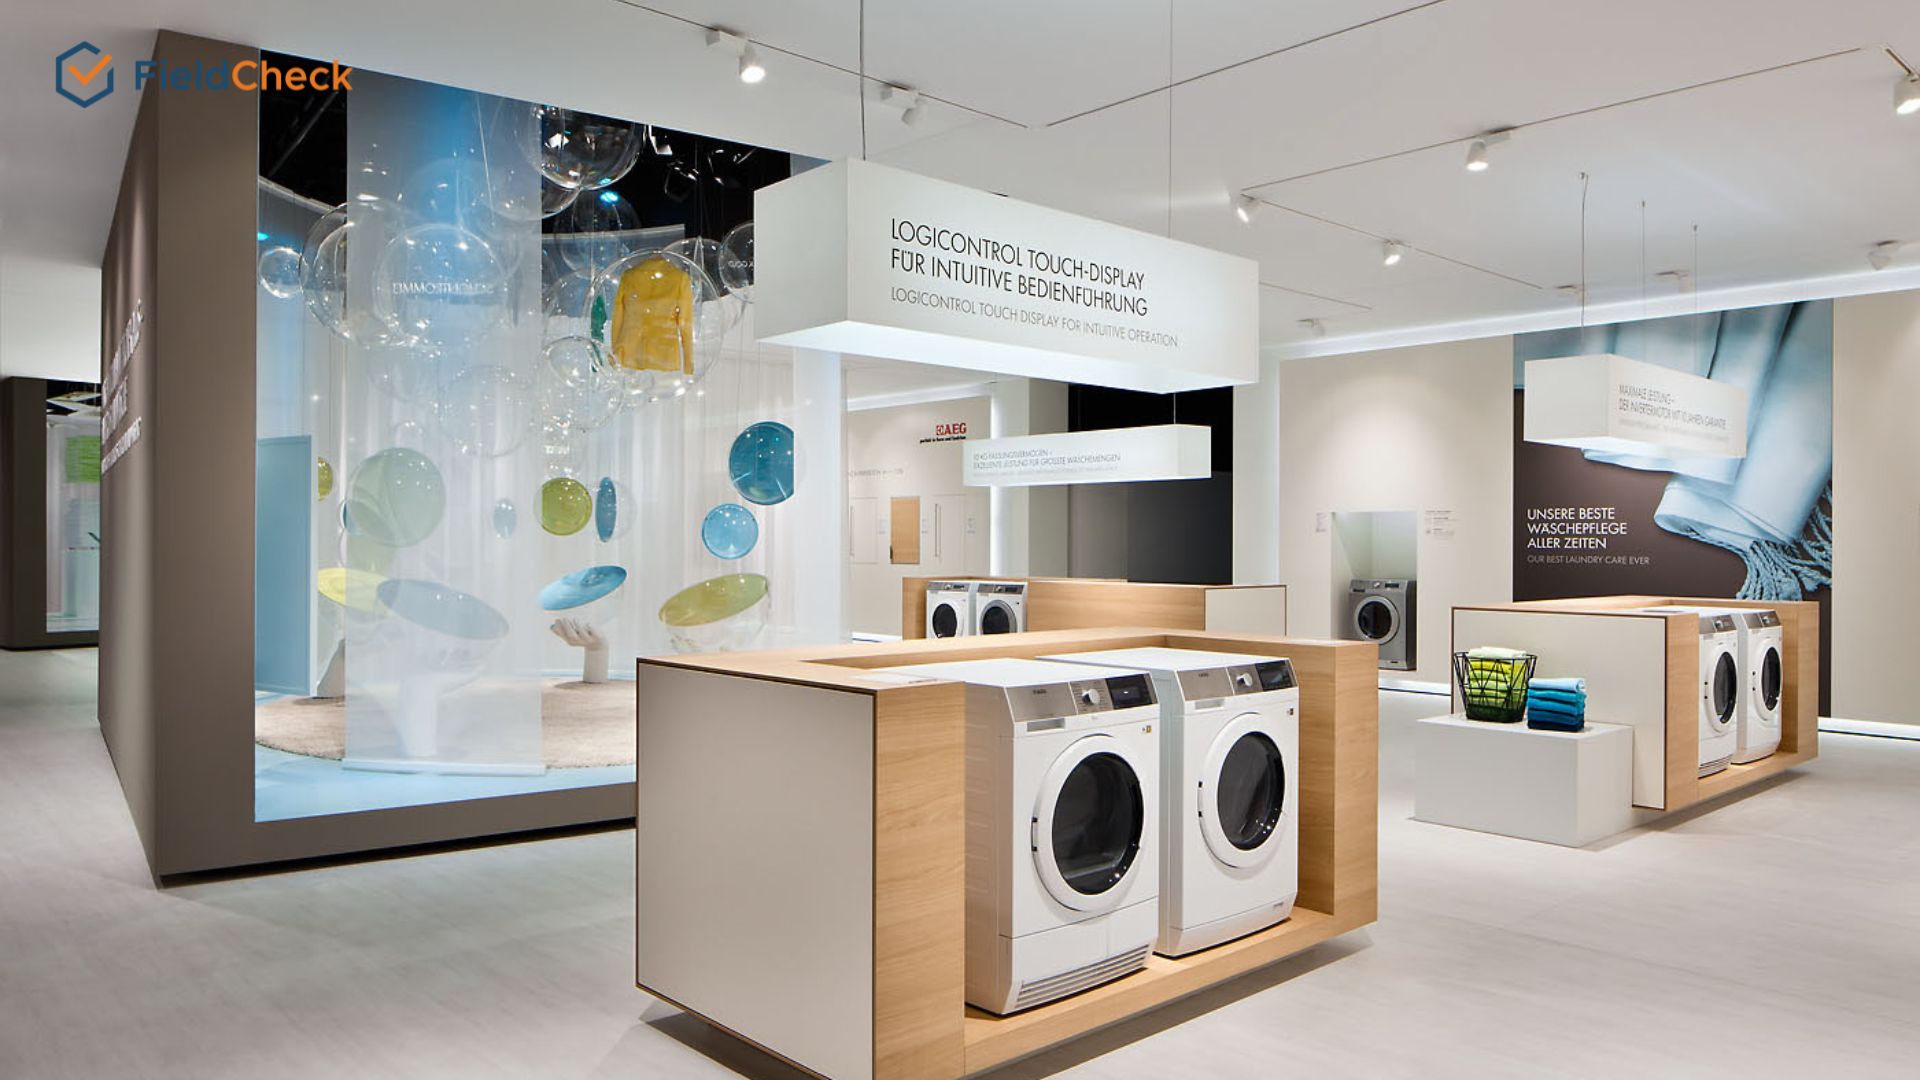 Managing Merchandise Display with Technology from Electrolux Perspective